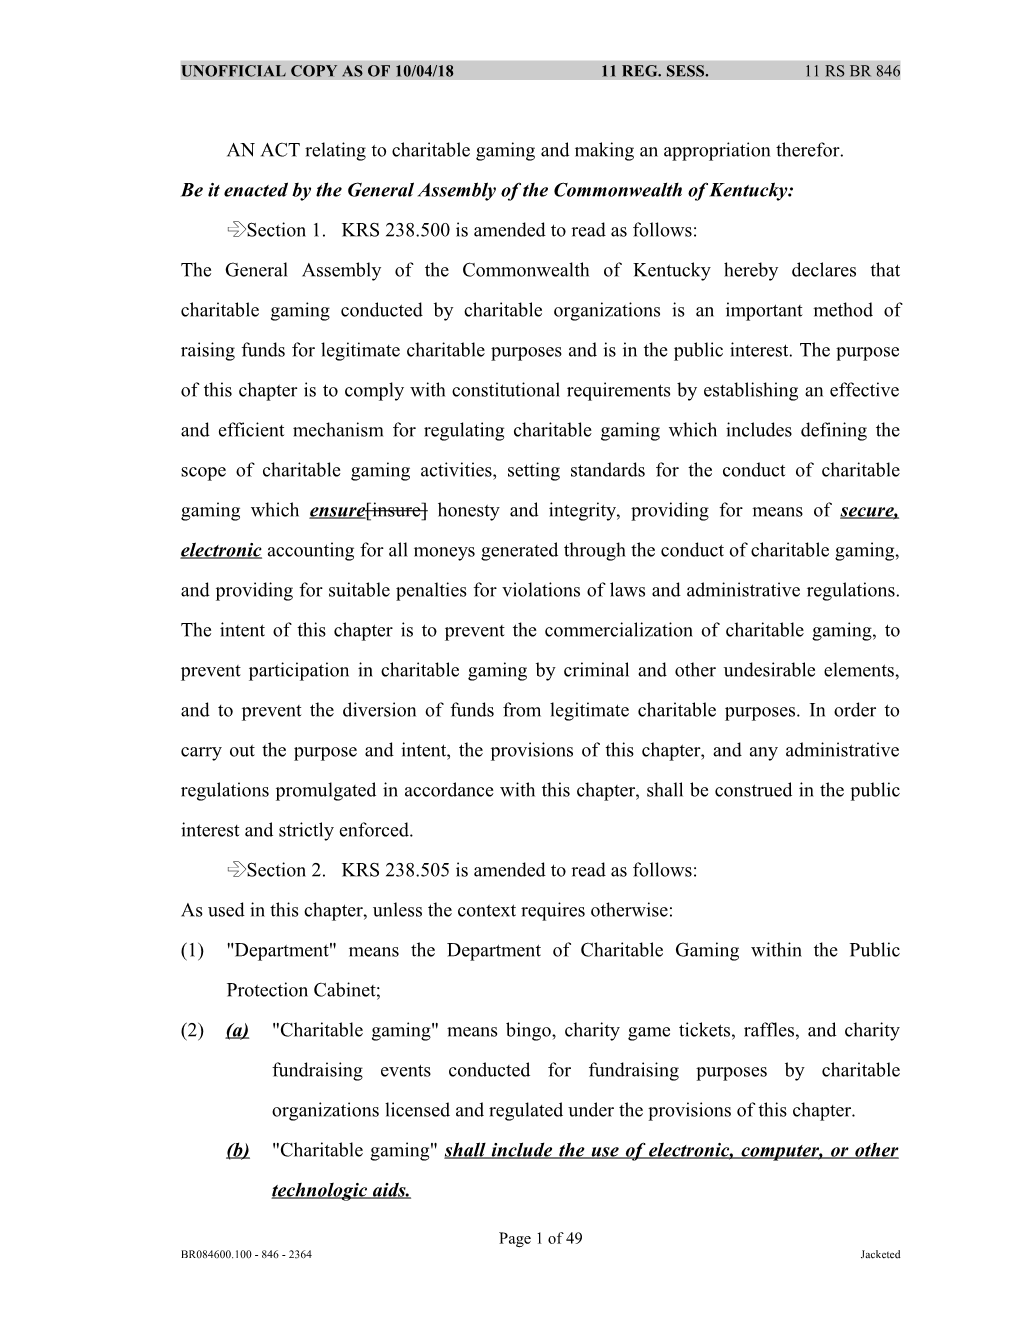 AN ACT Relating to Charitable Gaming and Making an Appropriation Therefor